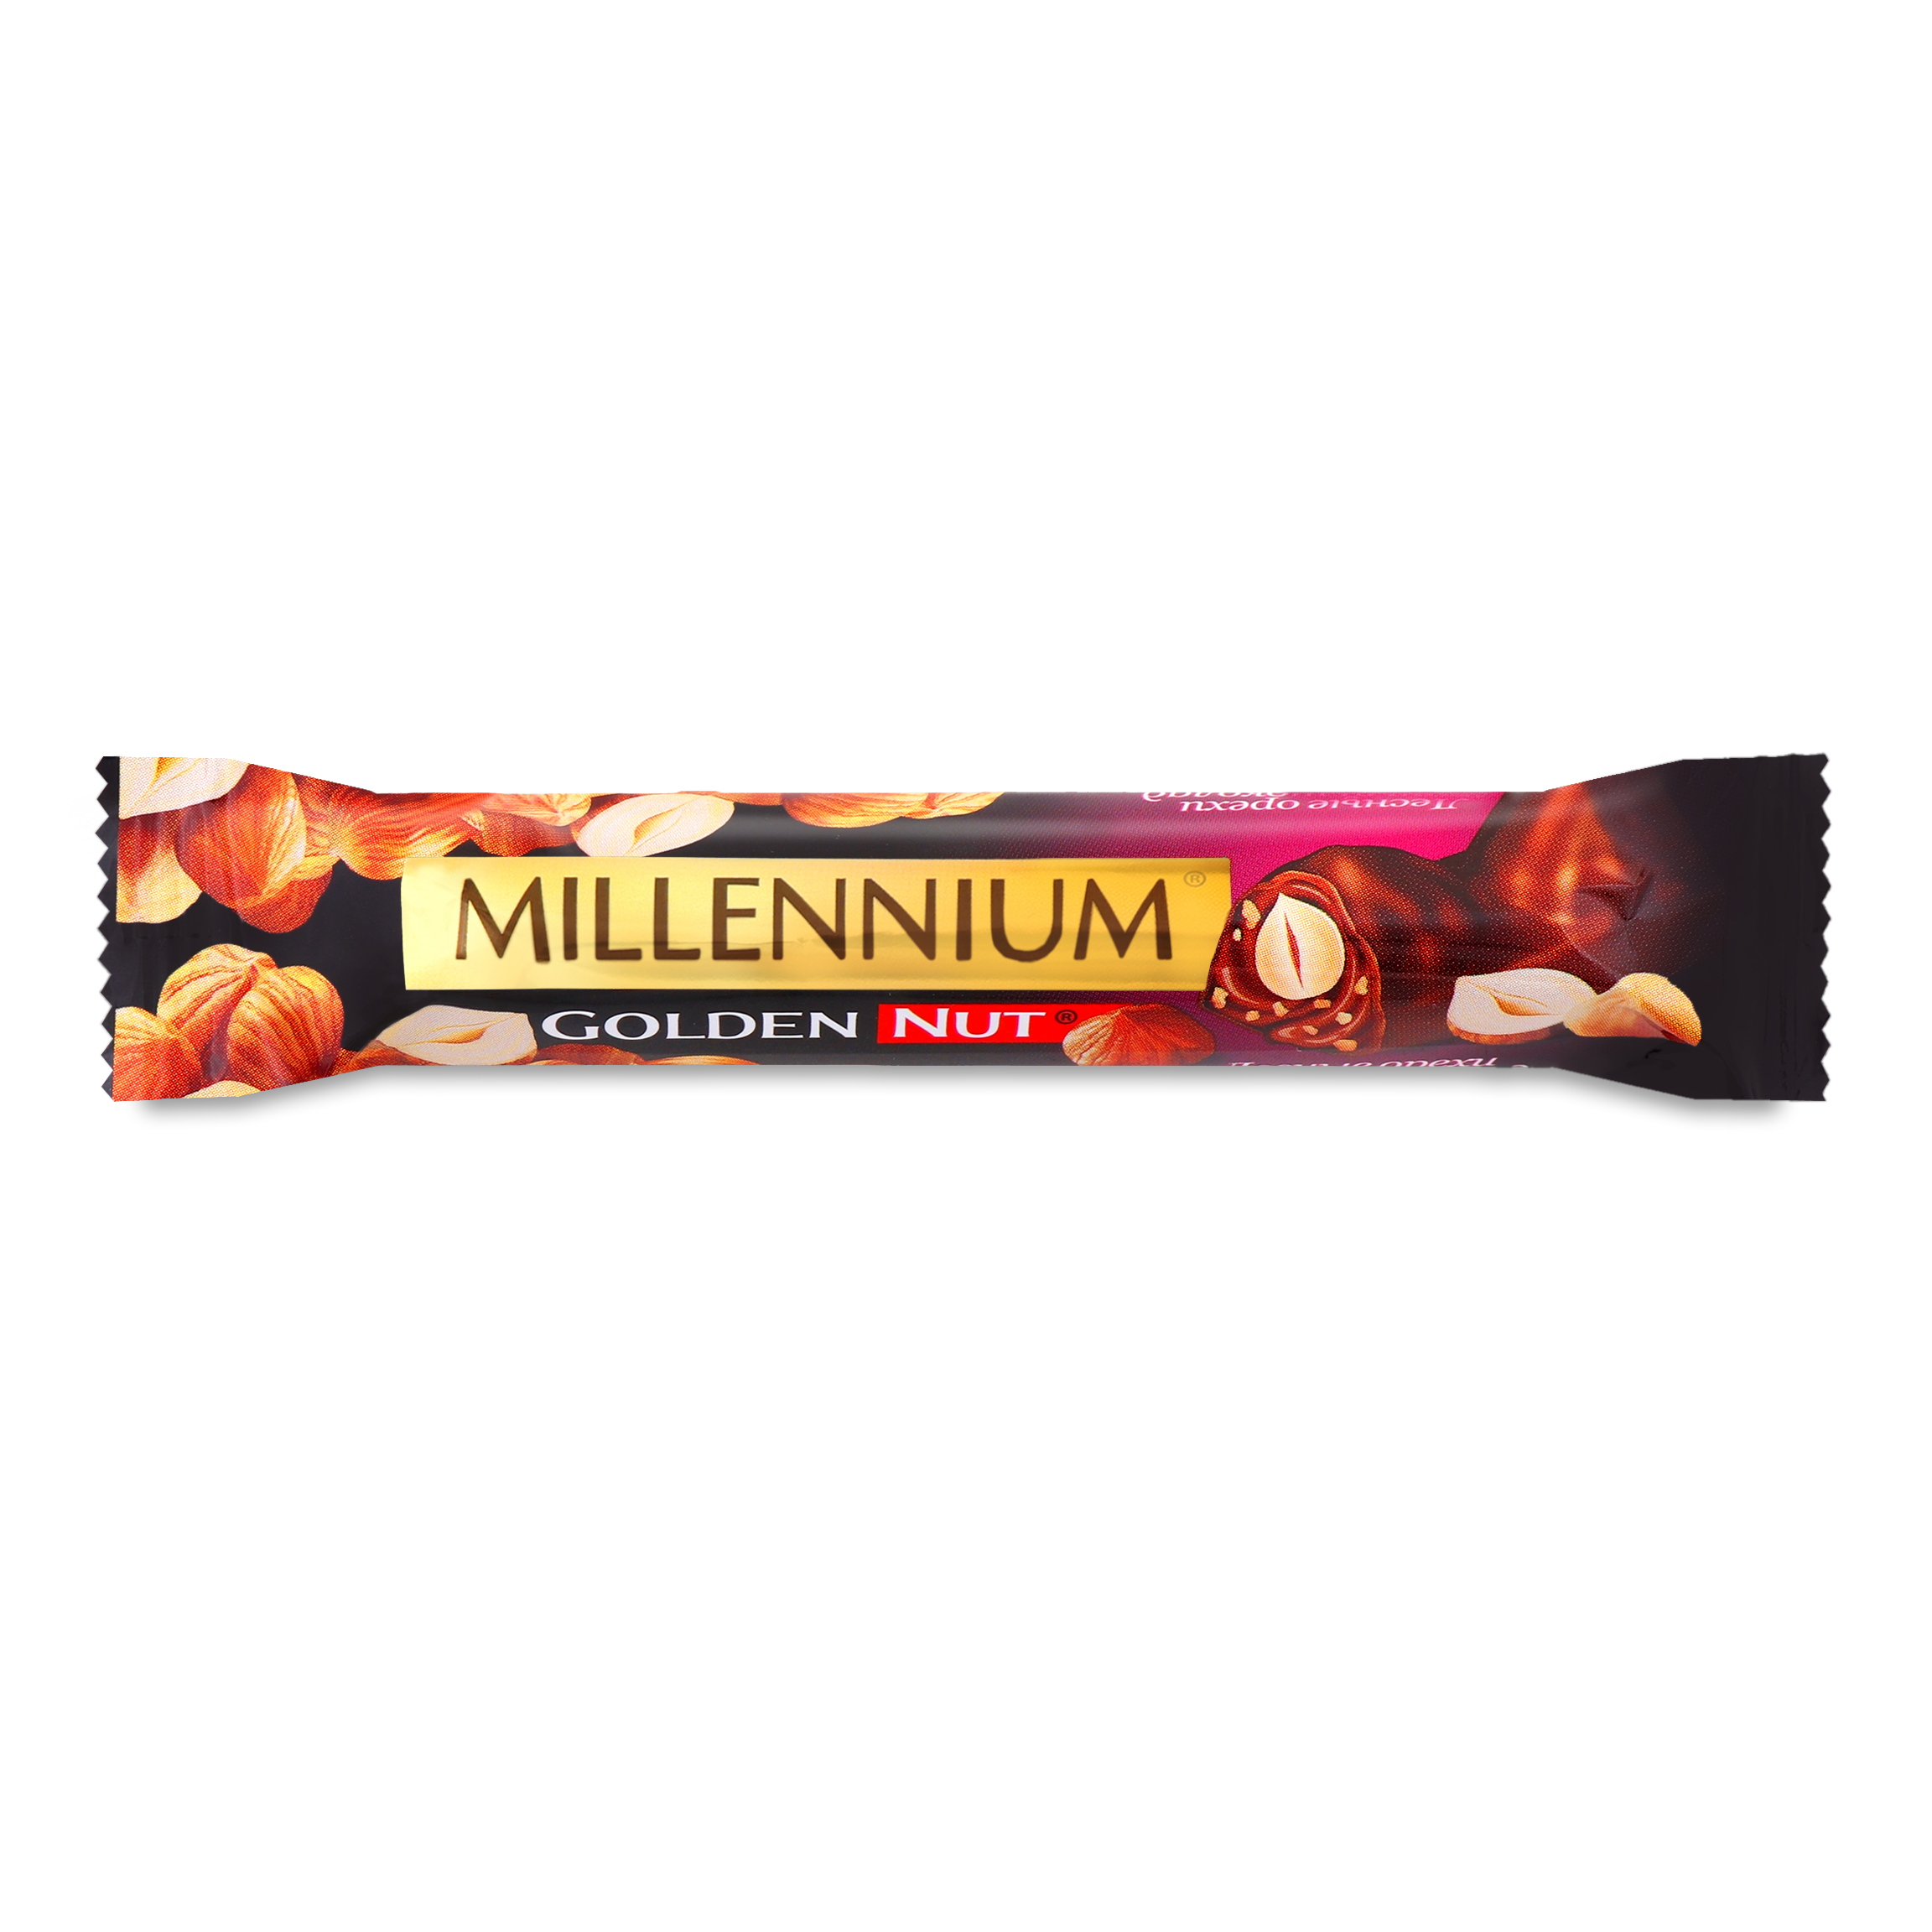 Millennium Golden Nut Dark Chocolate with Filling and Whole Hazelnuts 40g